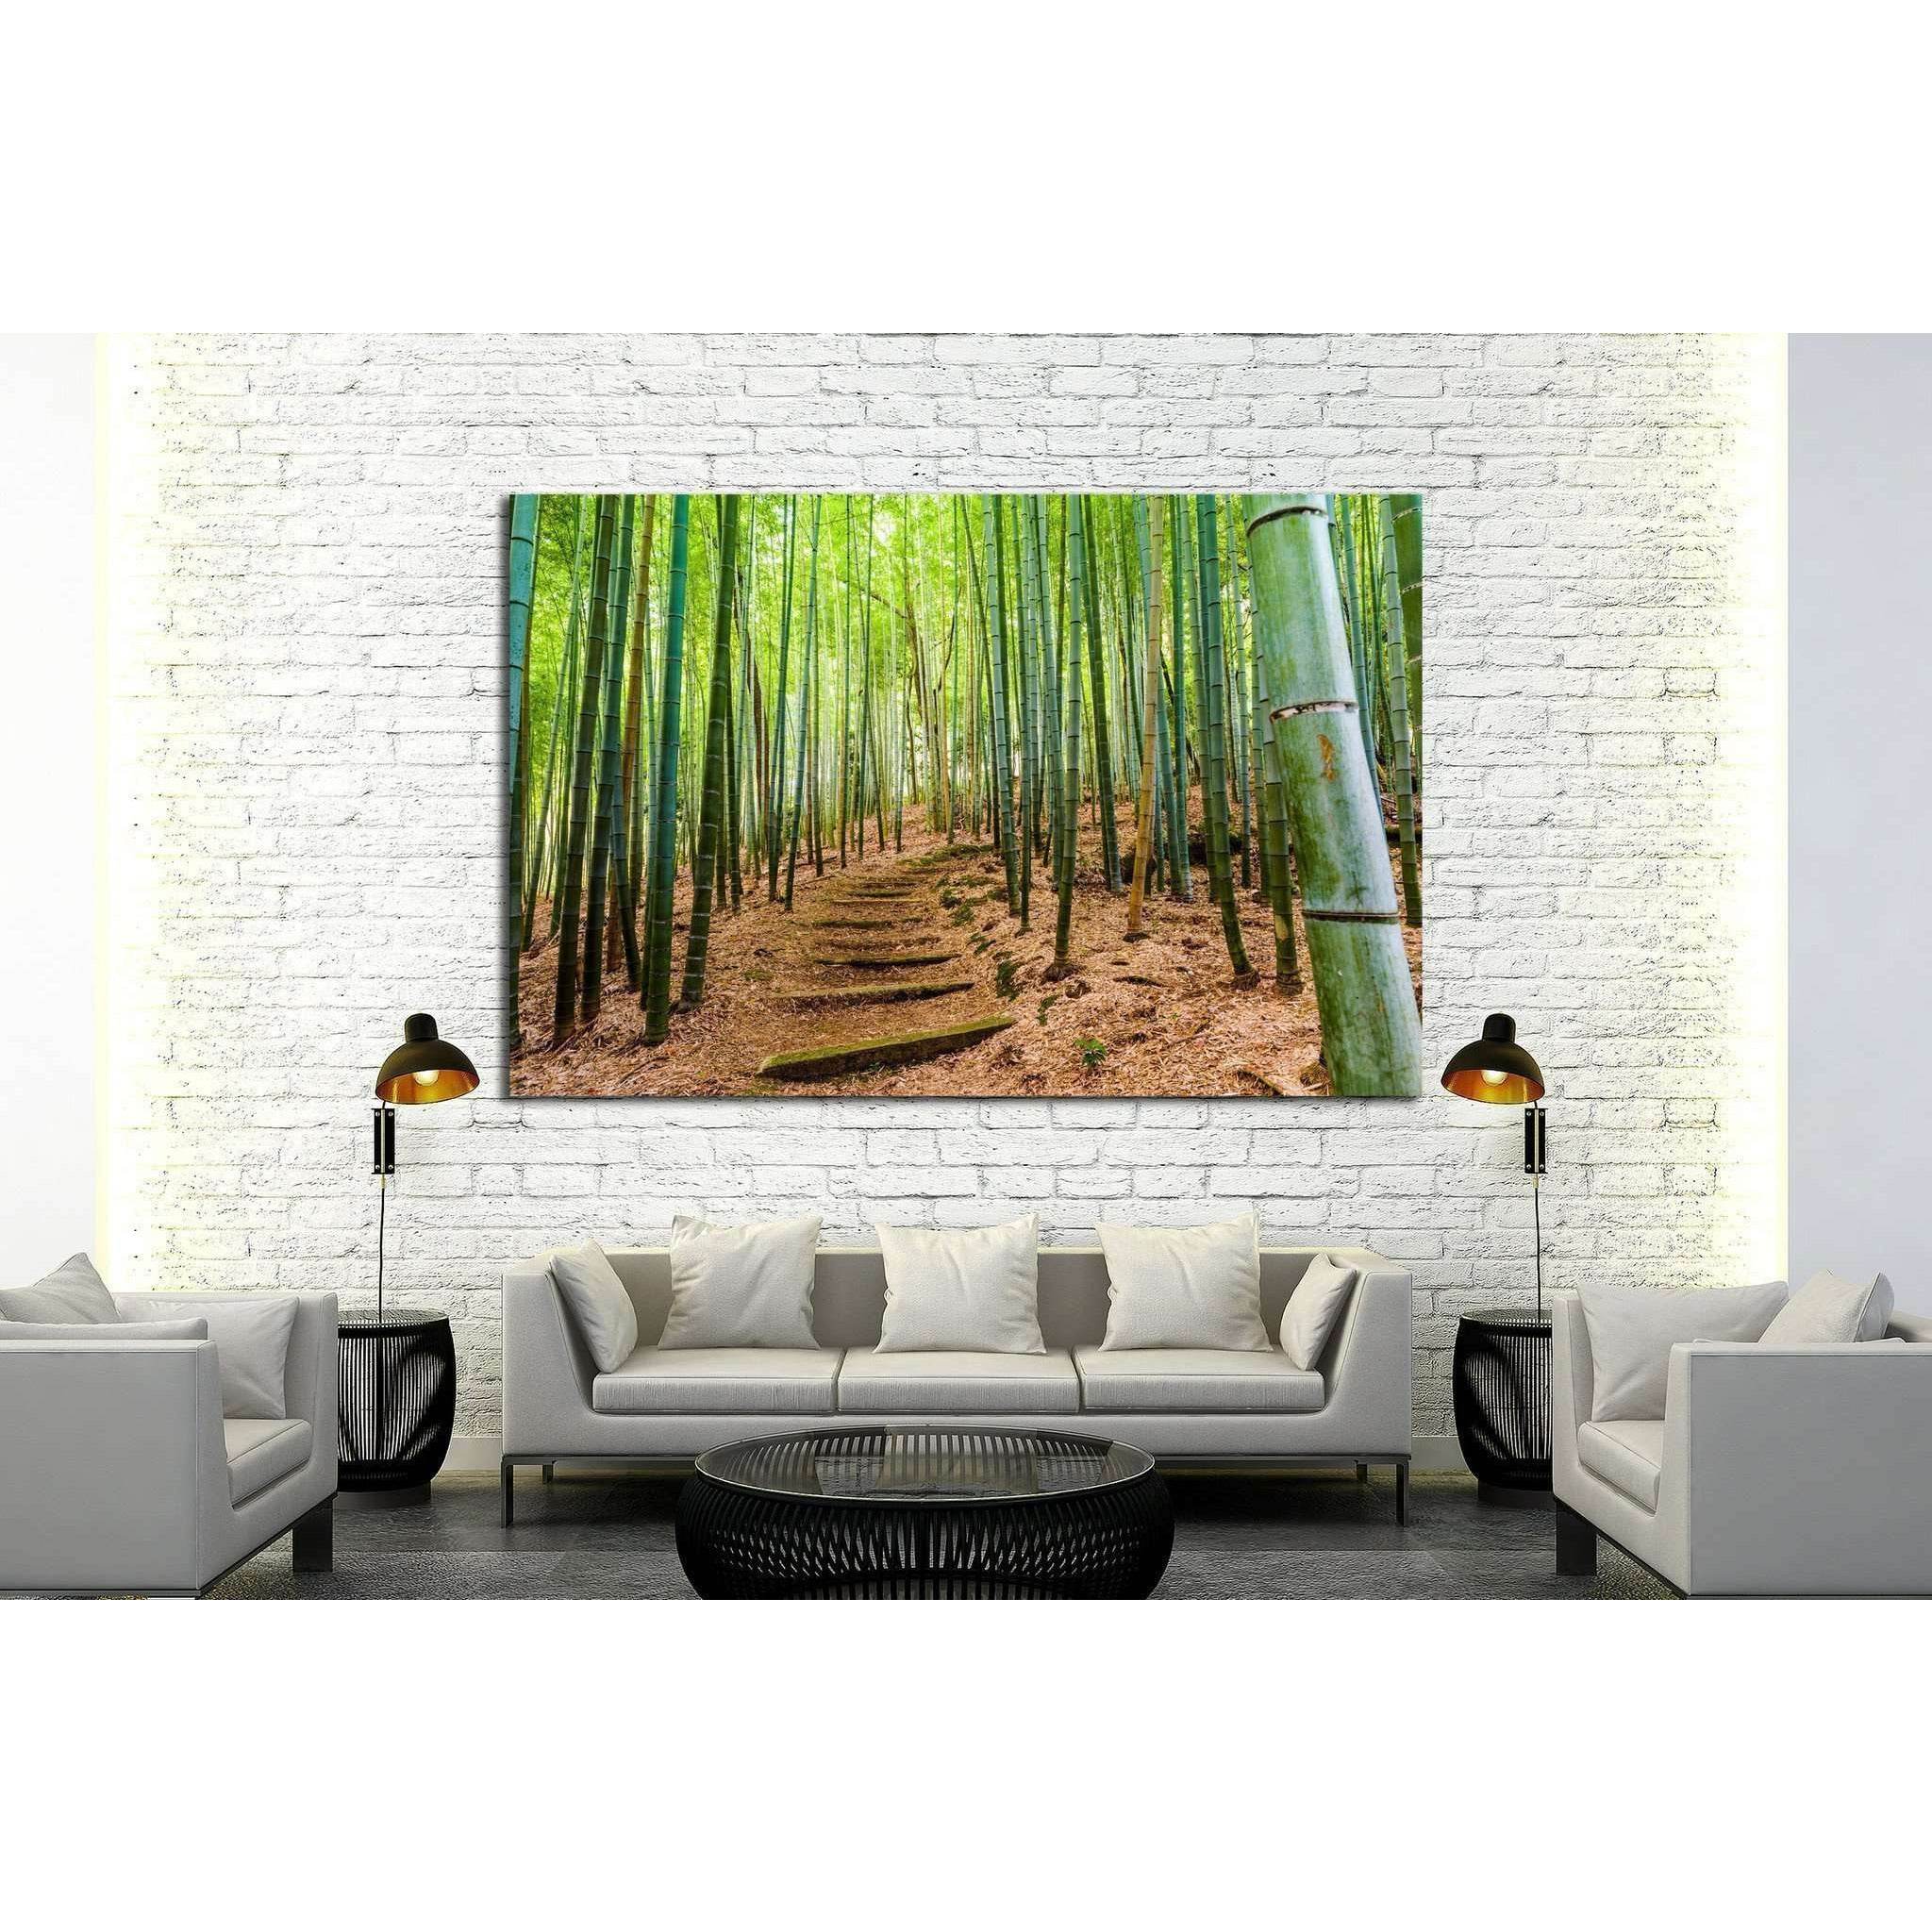 Kyoto, Japan bamboo forest №1987 Ready to Hang Canvas Print